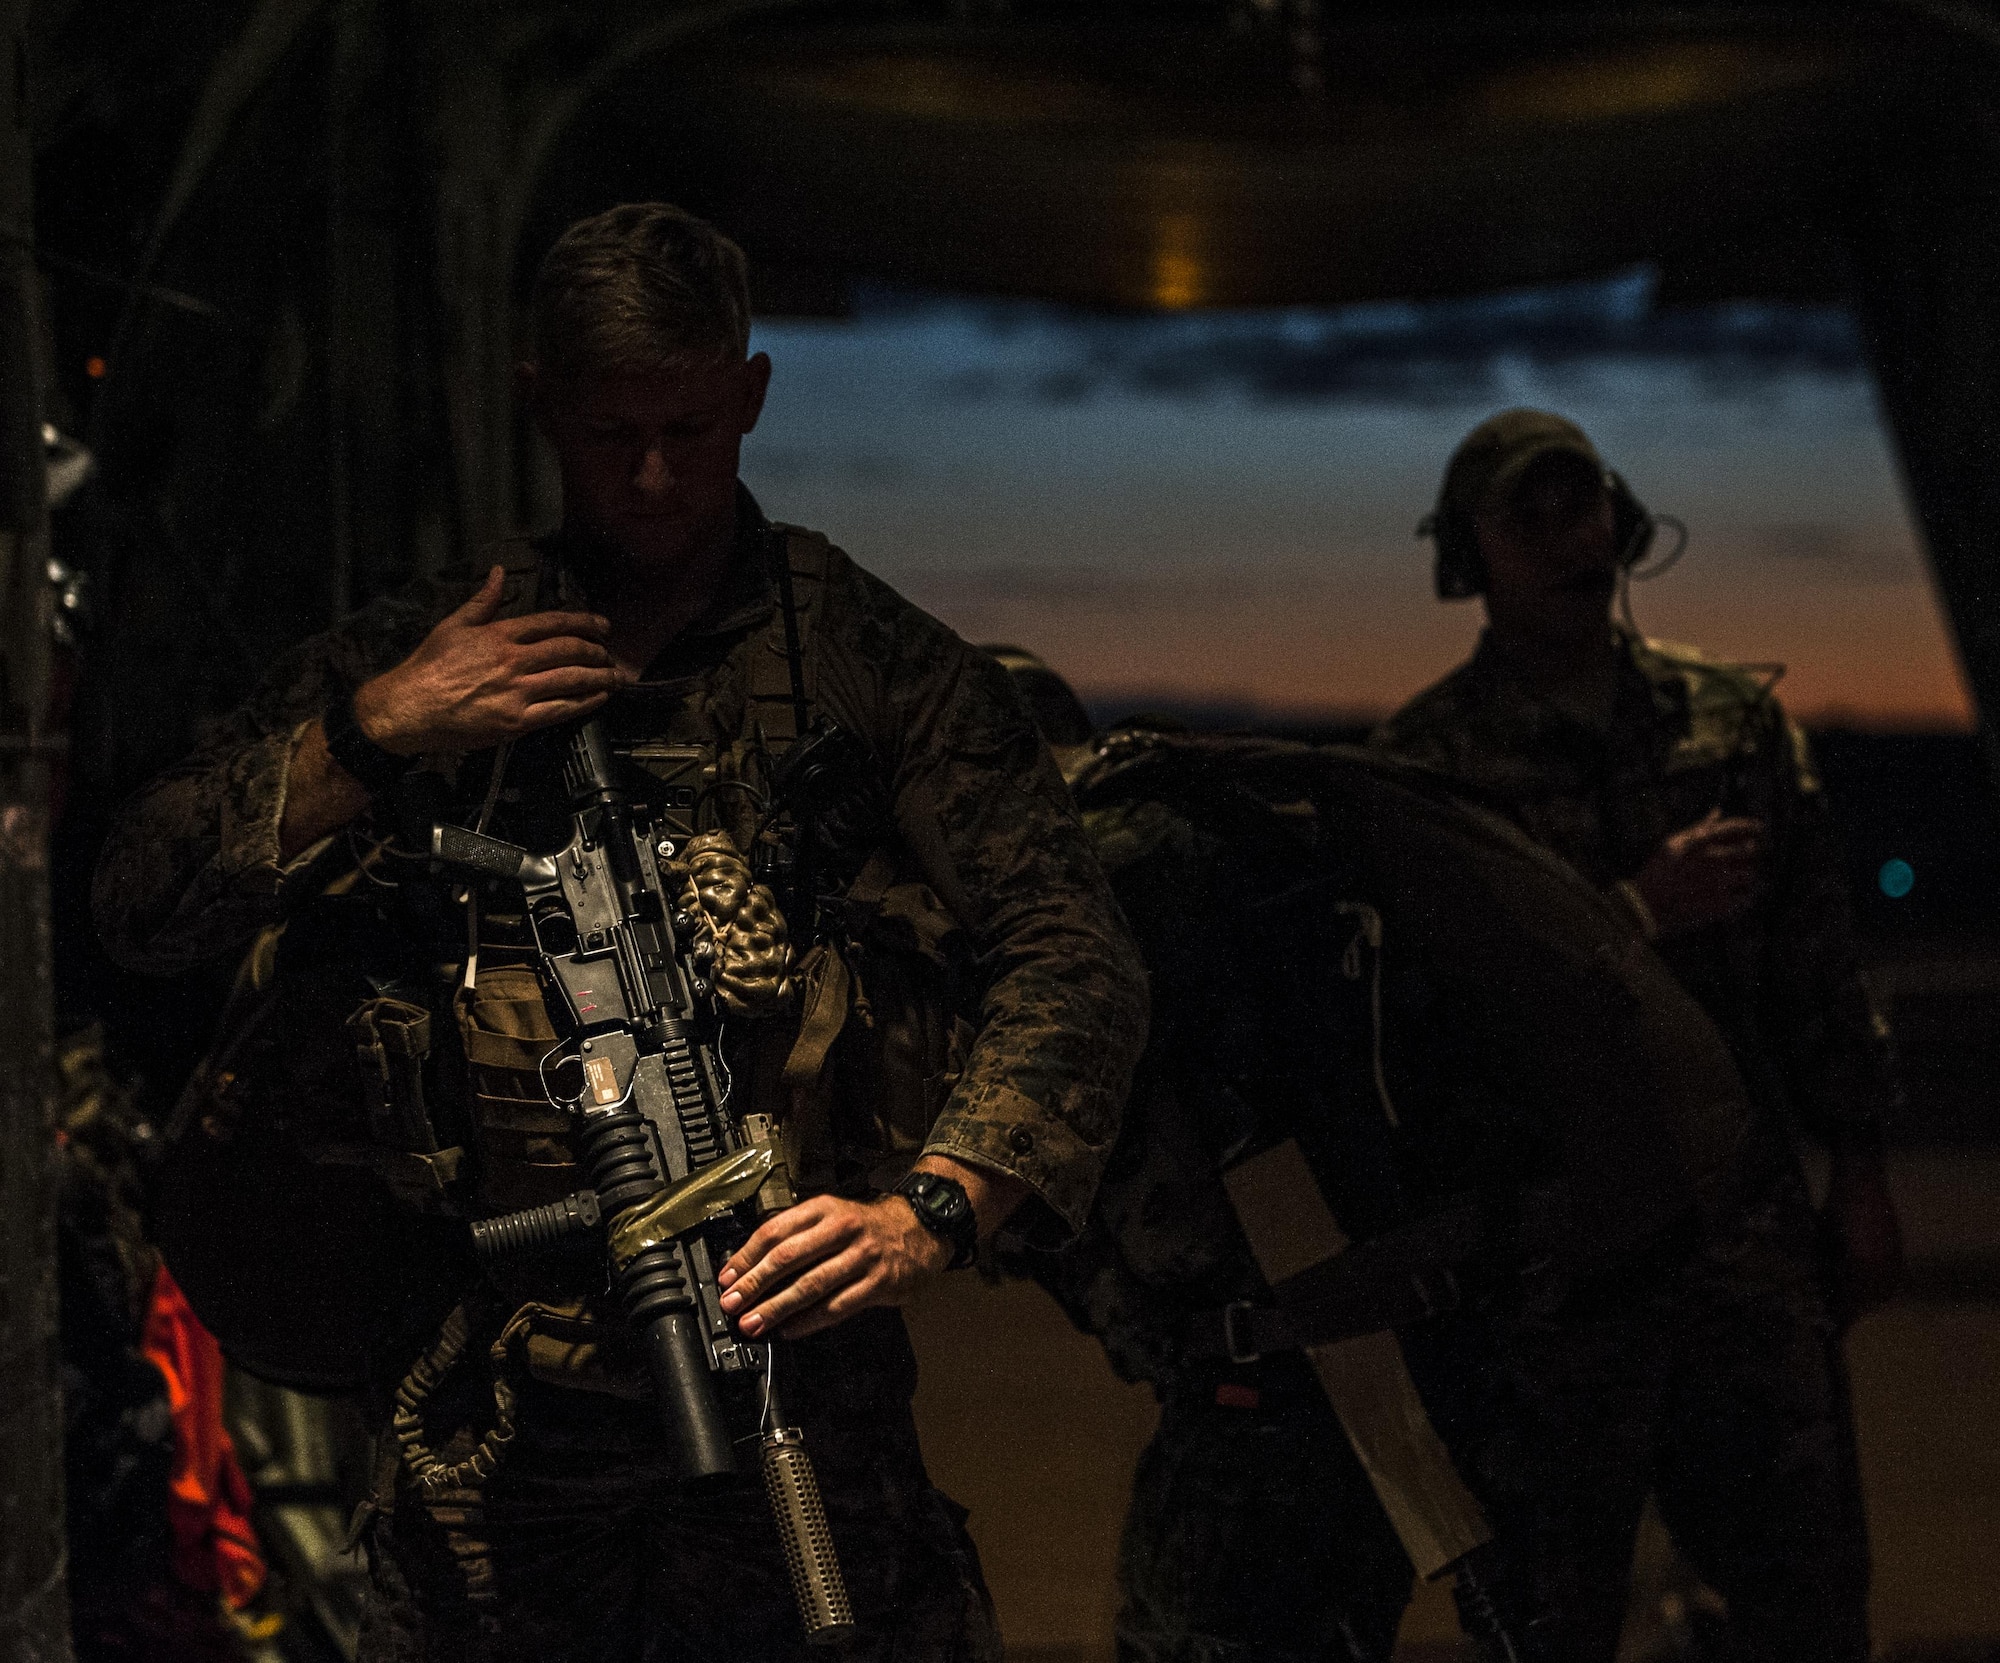 A U.S. Marine Corps 3rd Reconnaissance Battalion jumpmaster secures his weapon prior to high altitude, high opening (HAHO) jump operations from a U.S. Air Force 17th Special Operations Squadron MC-130J Commando II July 11, 2017, at Rockhampton, Australia. The U.S. Air Force 320th Special Tactics Squadron combat controllers executed multiple high altitude, low opening (HALO) and HAHO jumps with their Marine Corps partners during Talisman Saber 2017. (U.S. Air Force photo by Capt. Jessica Tait)